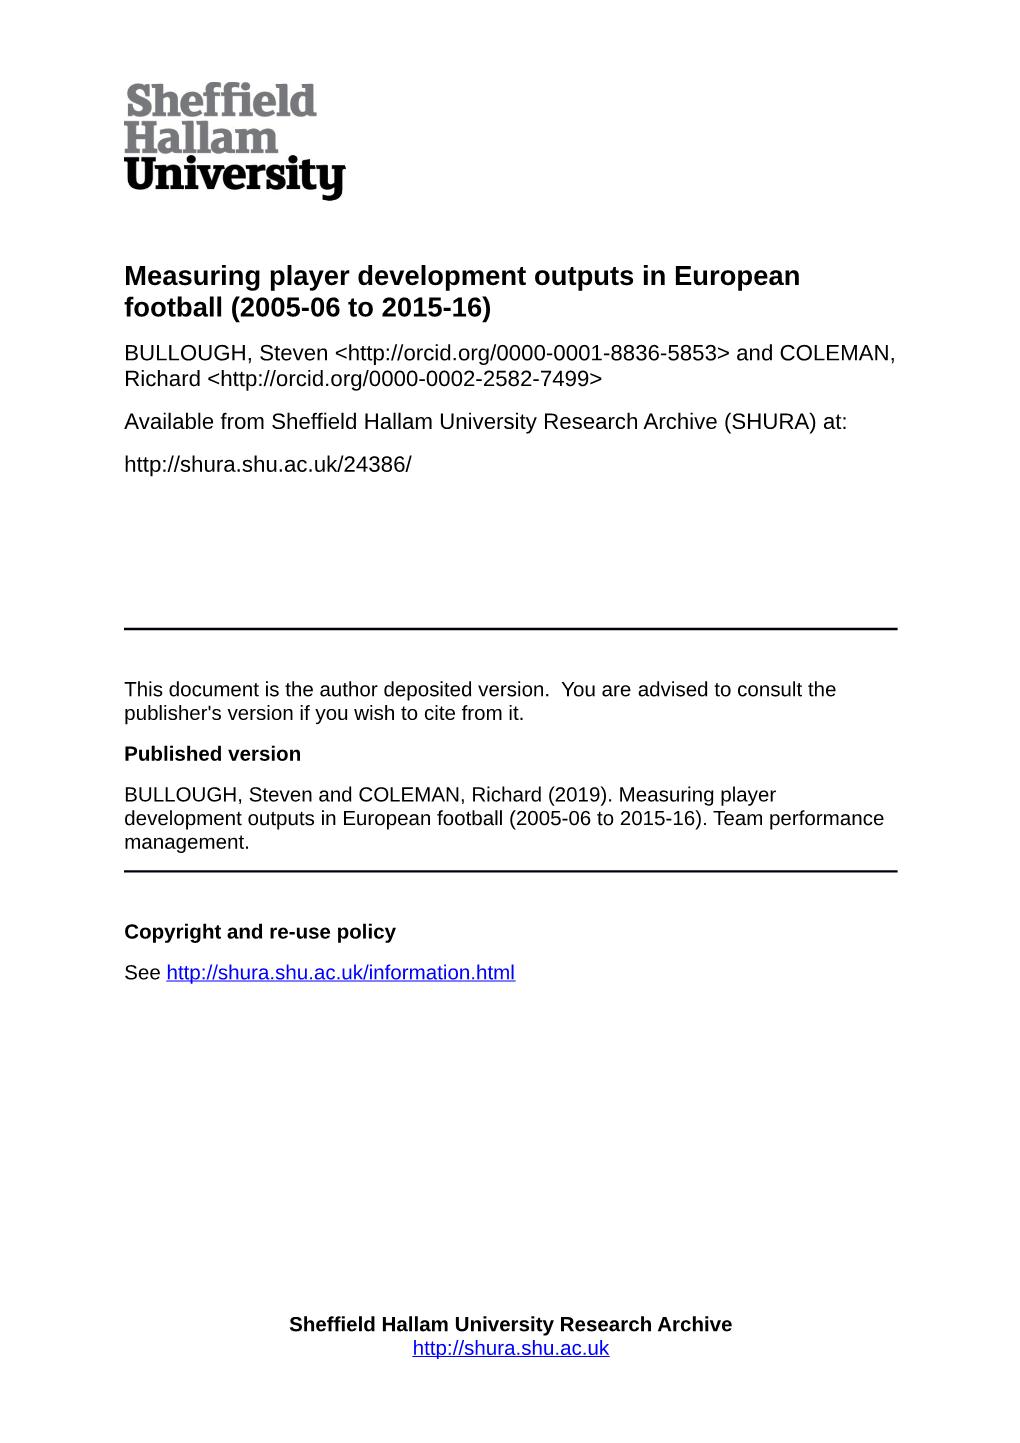 Measuring Player Development Outputs in European Football (2005-06 to 2015-16)